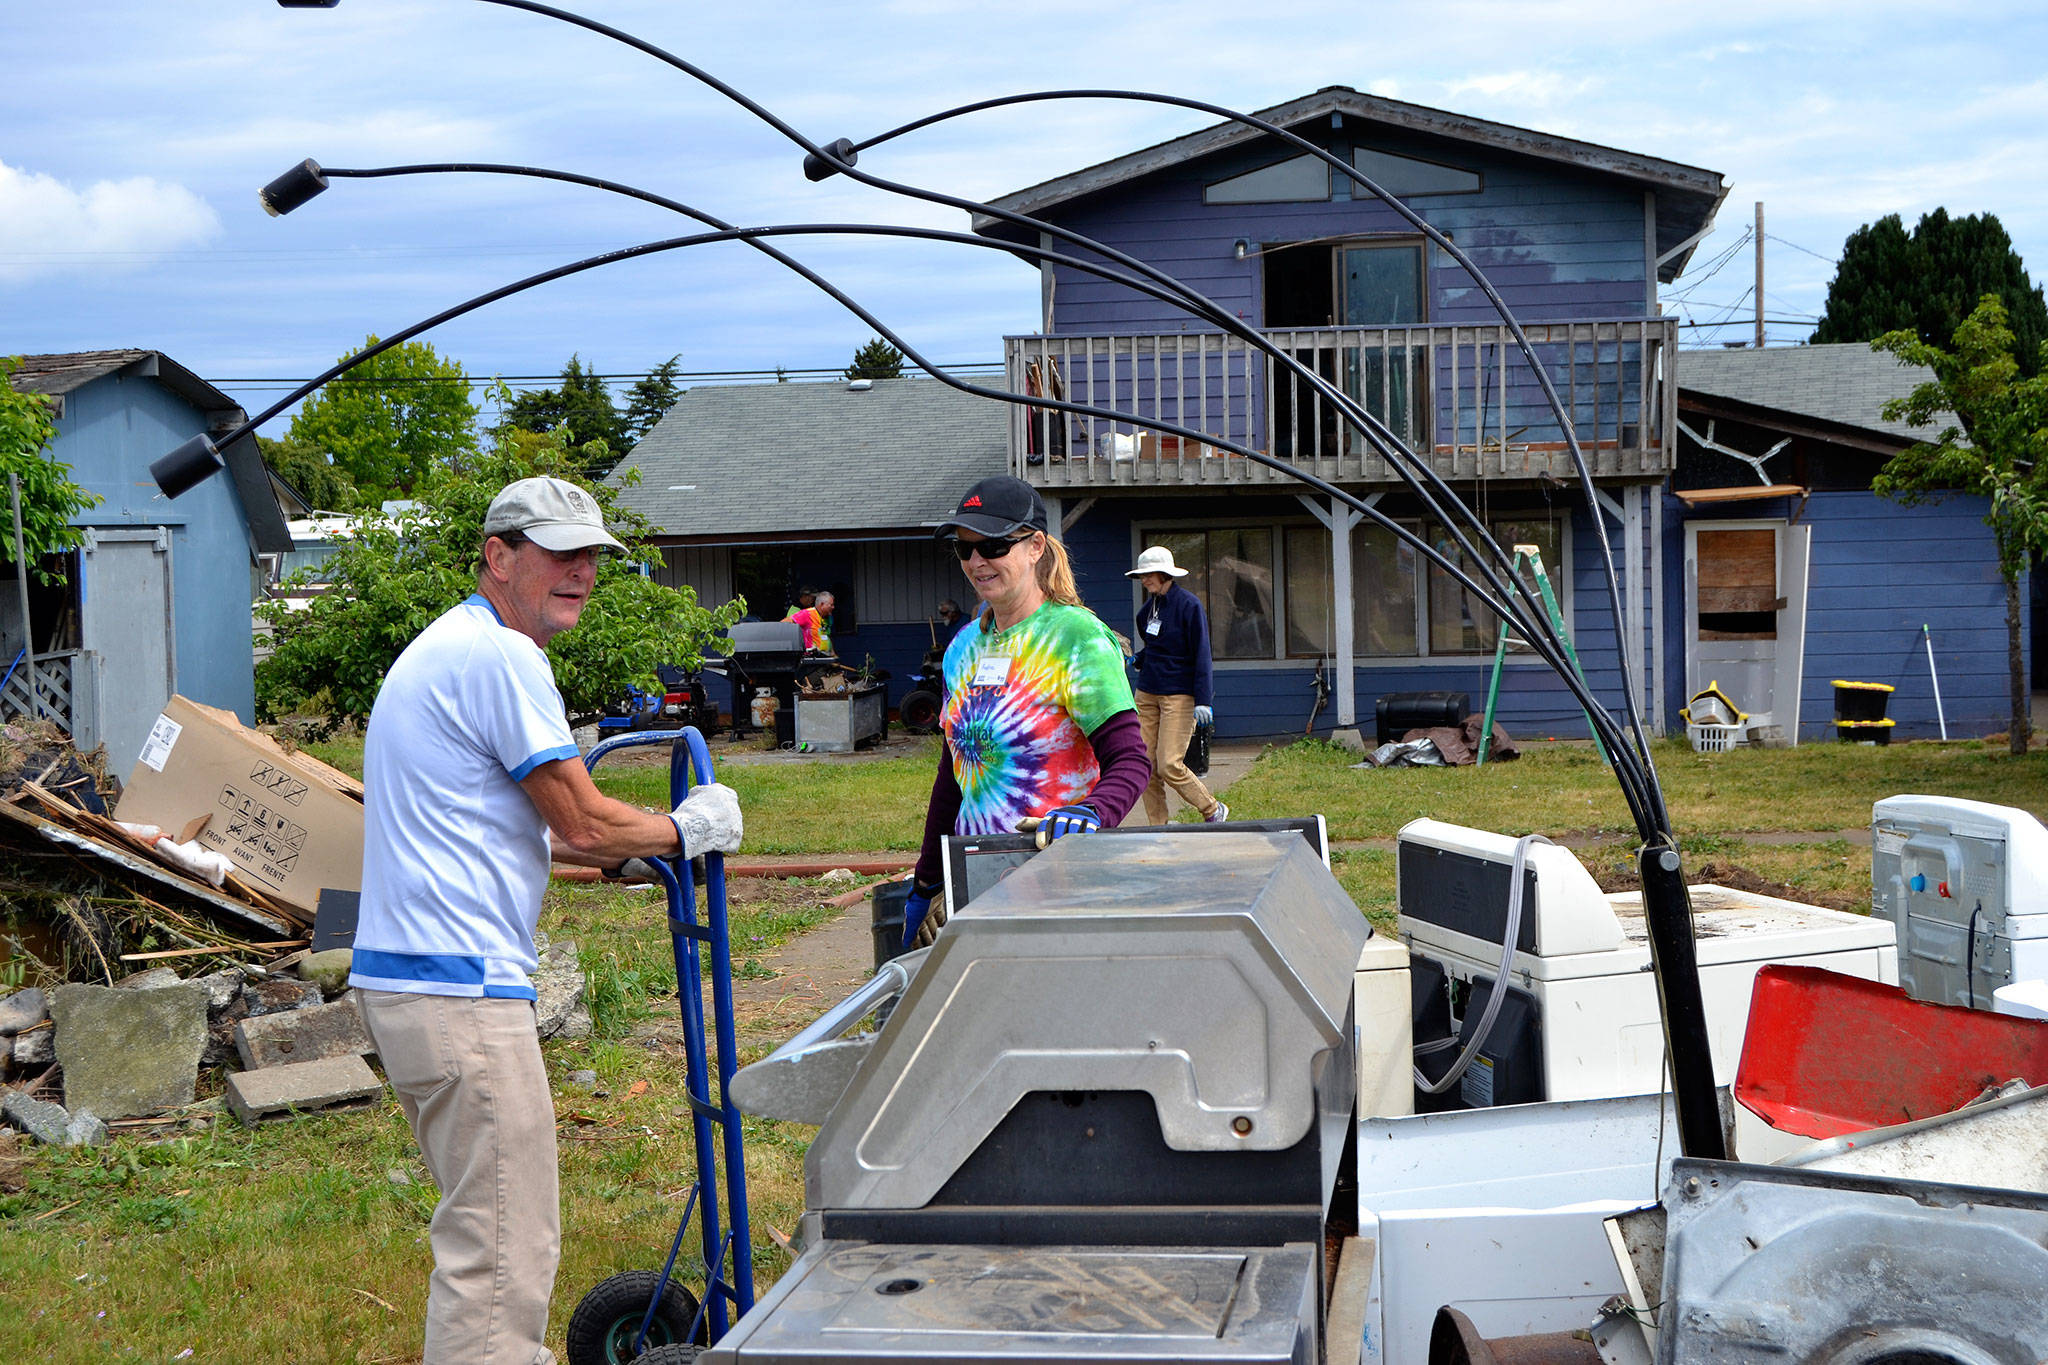 Rick Reed of Dallas, Texas, and Andrea Putnam of Princeton, NJ., move a dryer during Sequim Service Fest’s first house clean-up on June 5. Both Reed and Putnam plan to stay and volunteer in Sequim through the event’s finish on June 15. Sequim Gazette photos by Matthew Nash